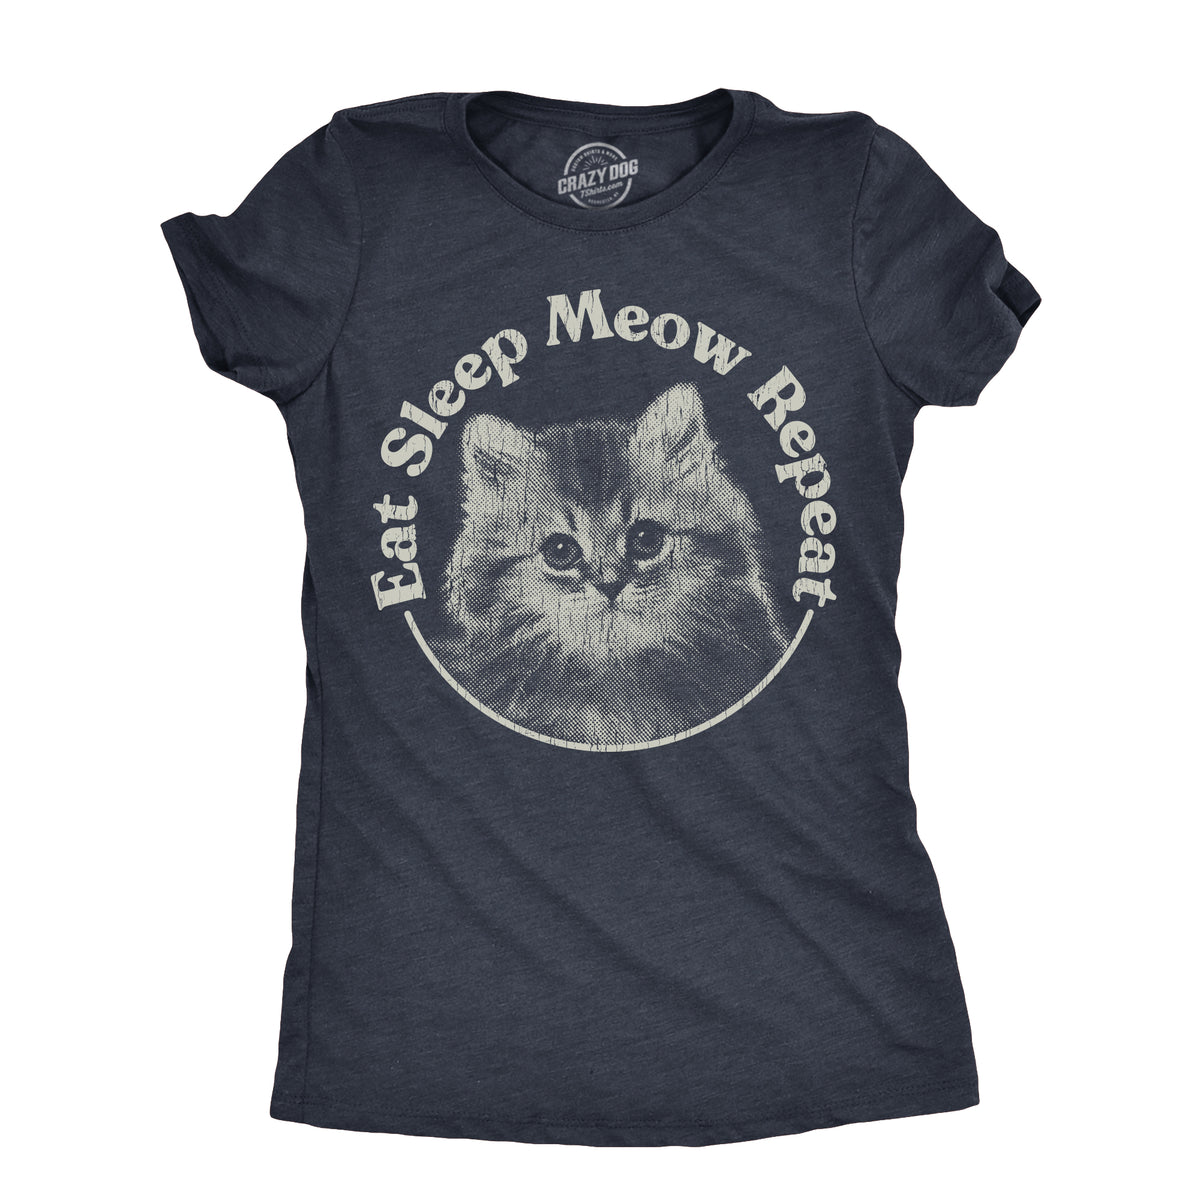 Funny Heather Navy - MEOWREPEAT Eat Sleep Meow Repeat Womens T Shirt Nerdy Cat sarcastic Tee